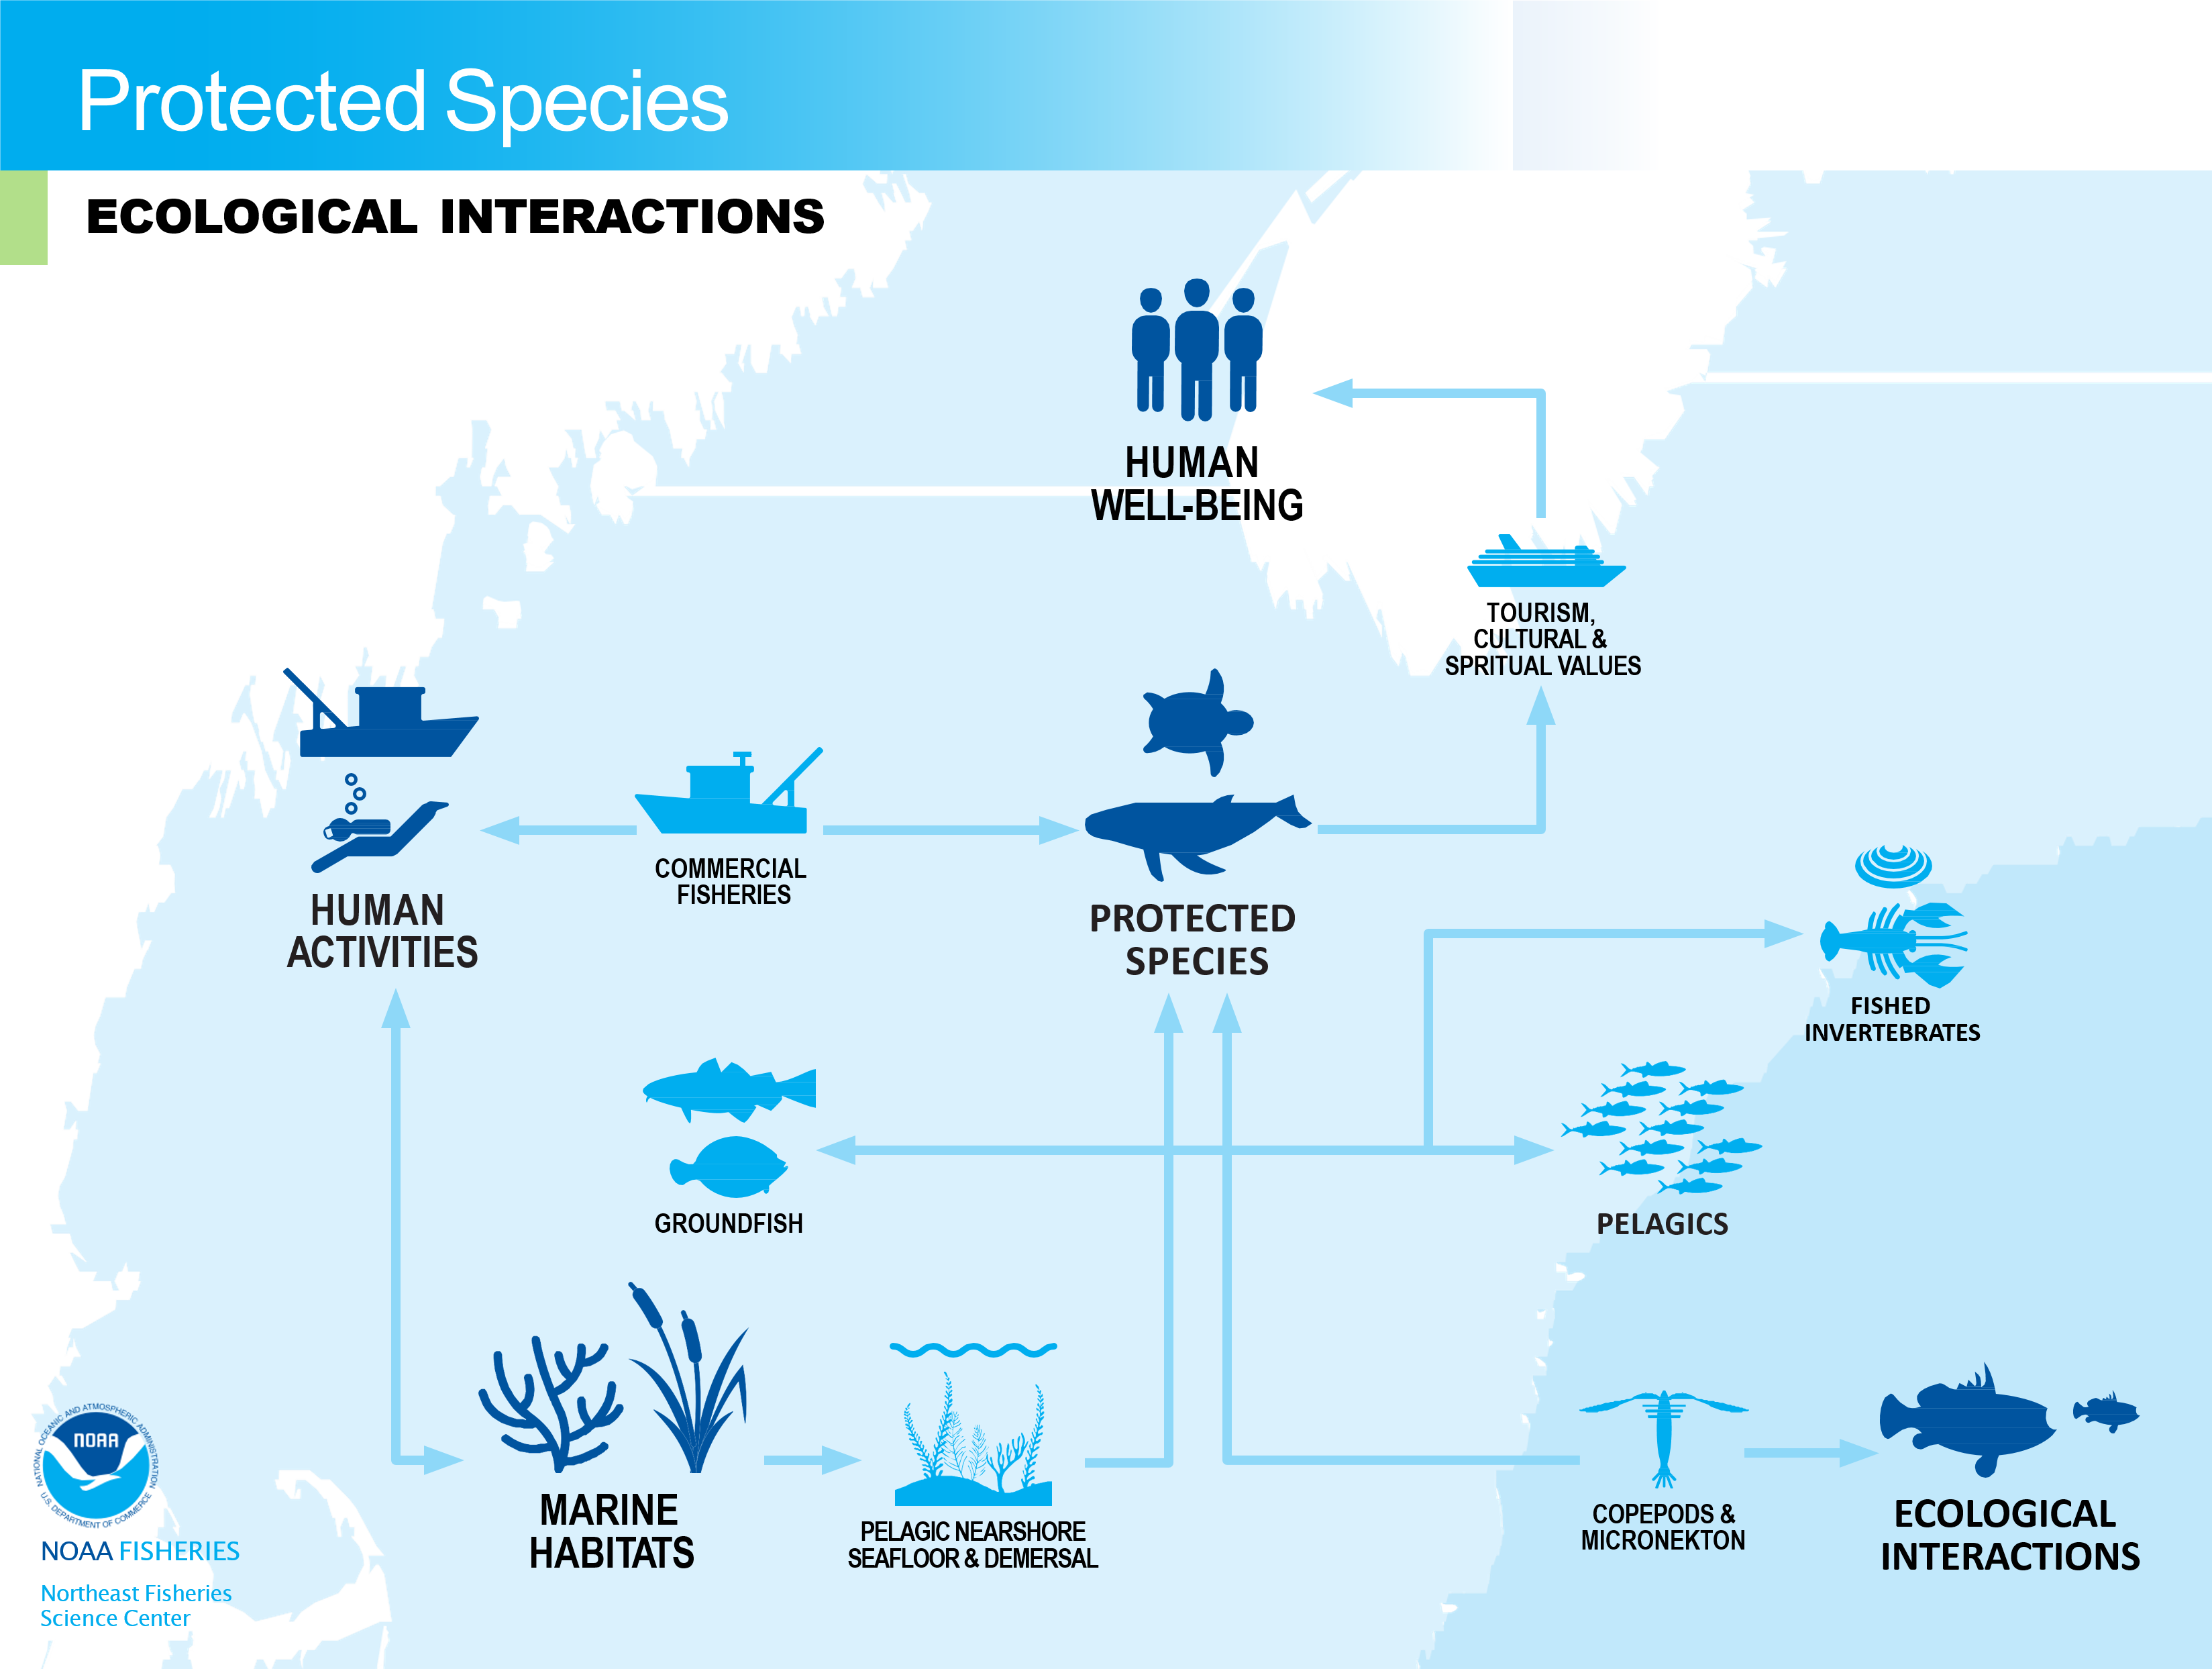 Conceptual model of protected species ecological interactions in the NE-LME.